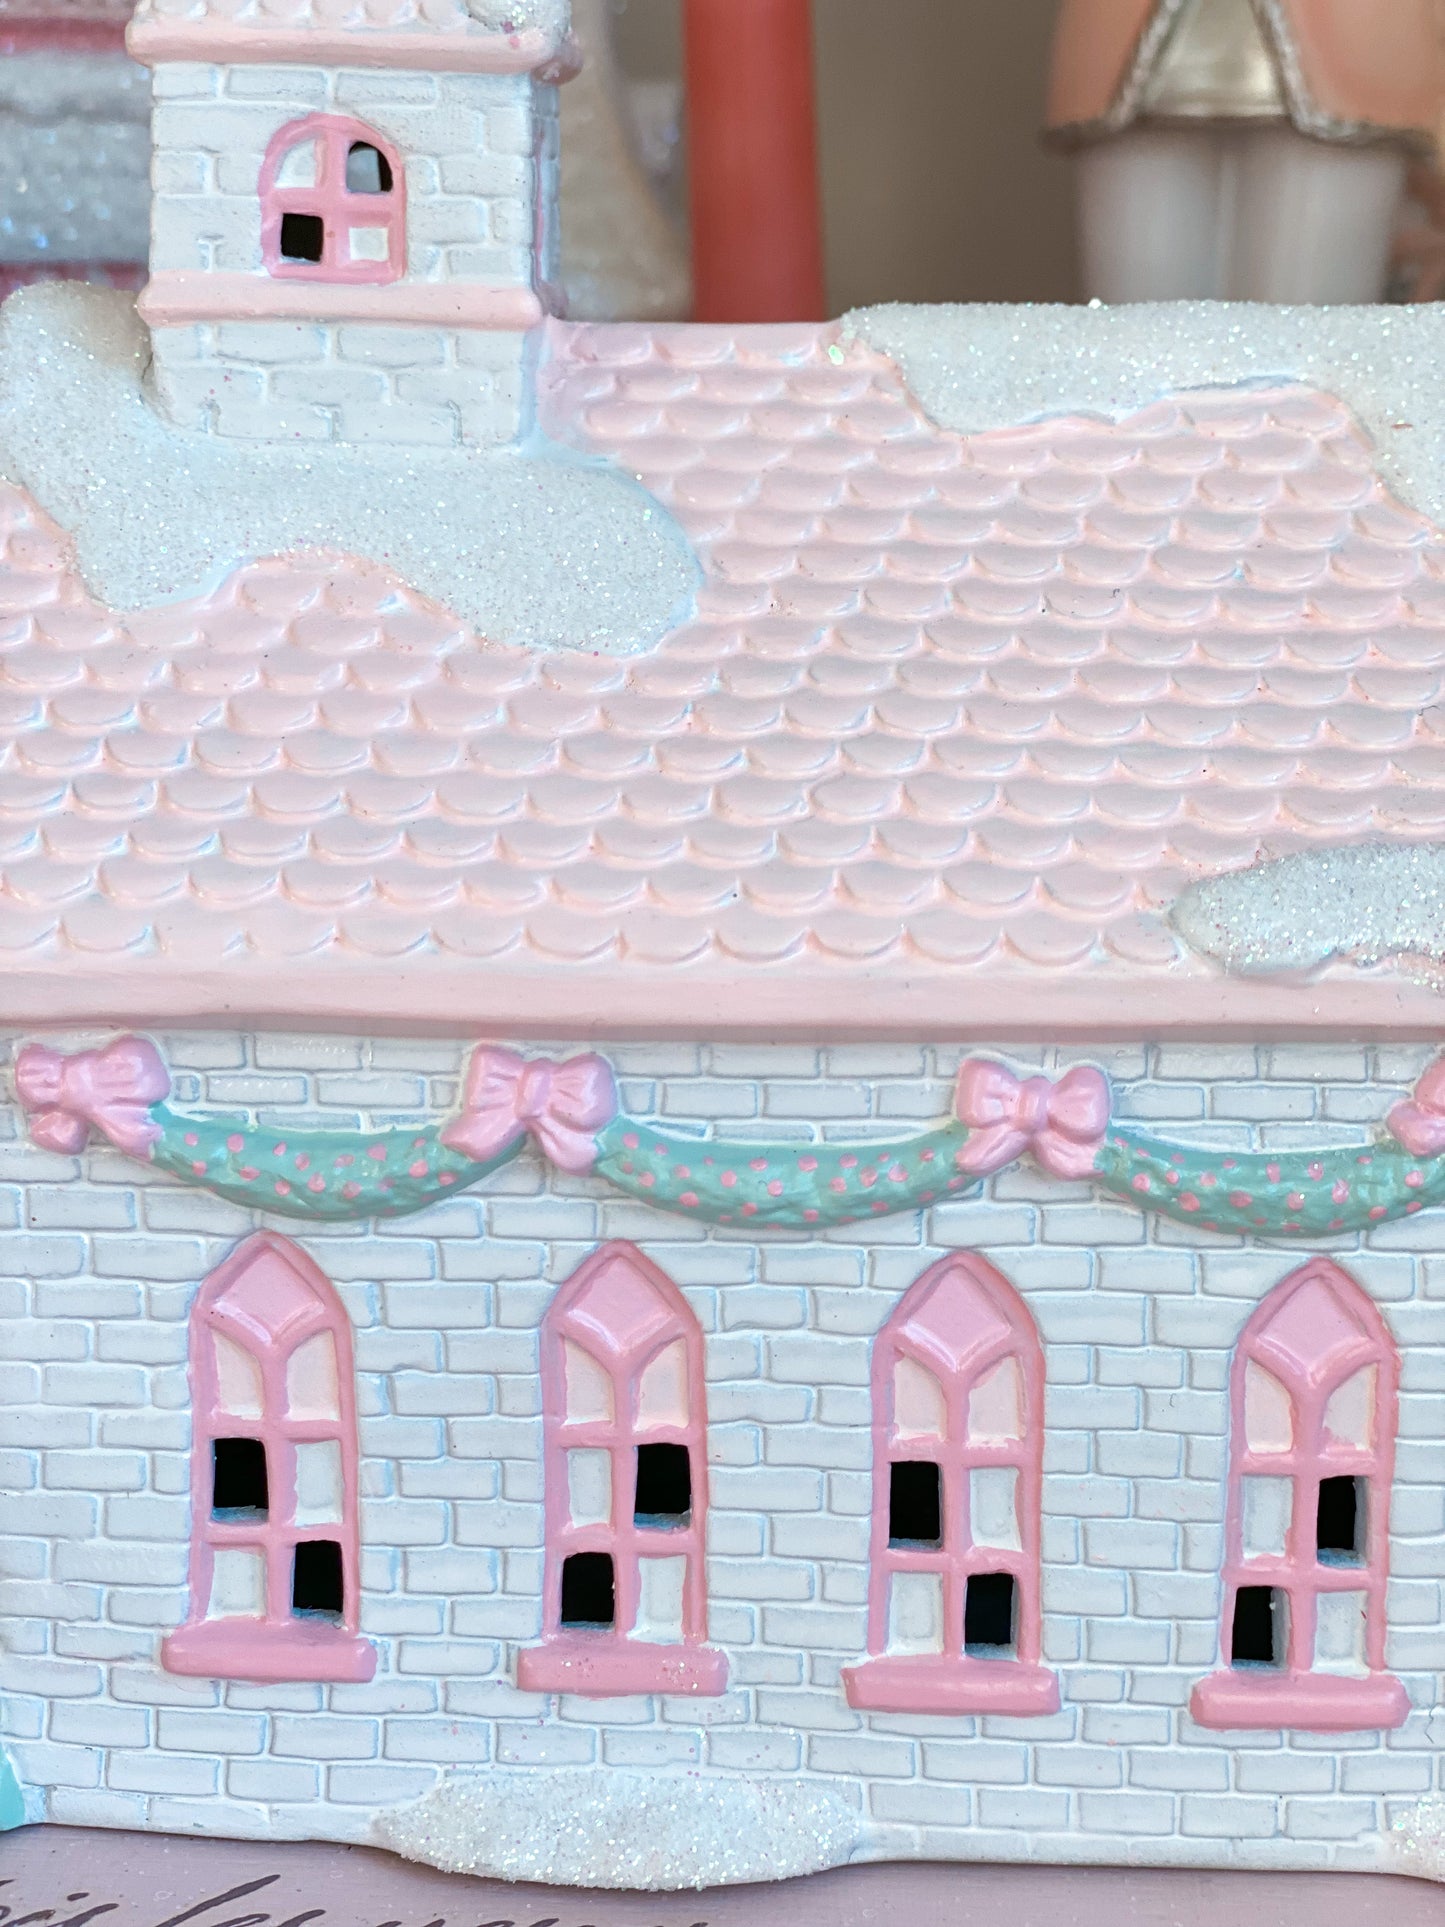 Bespoke Porcelain Pastel Pink and White Hand Painted Christmas Village Chapel